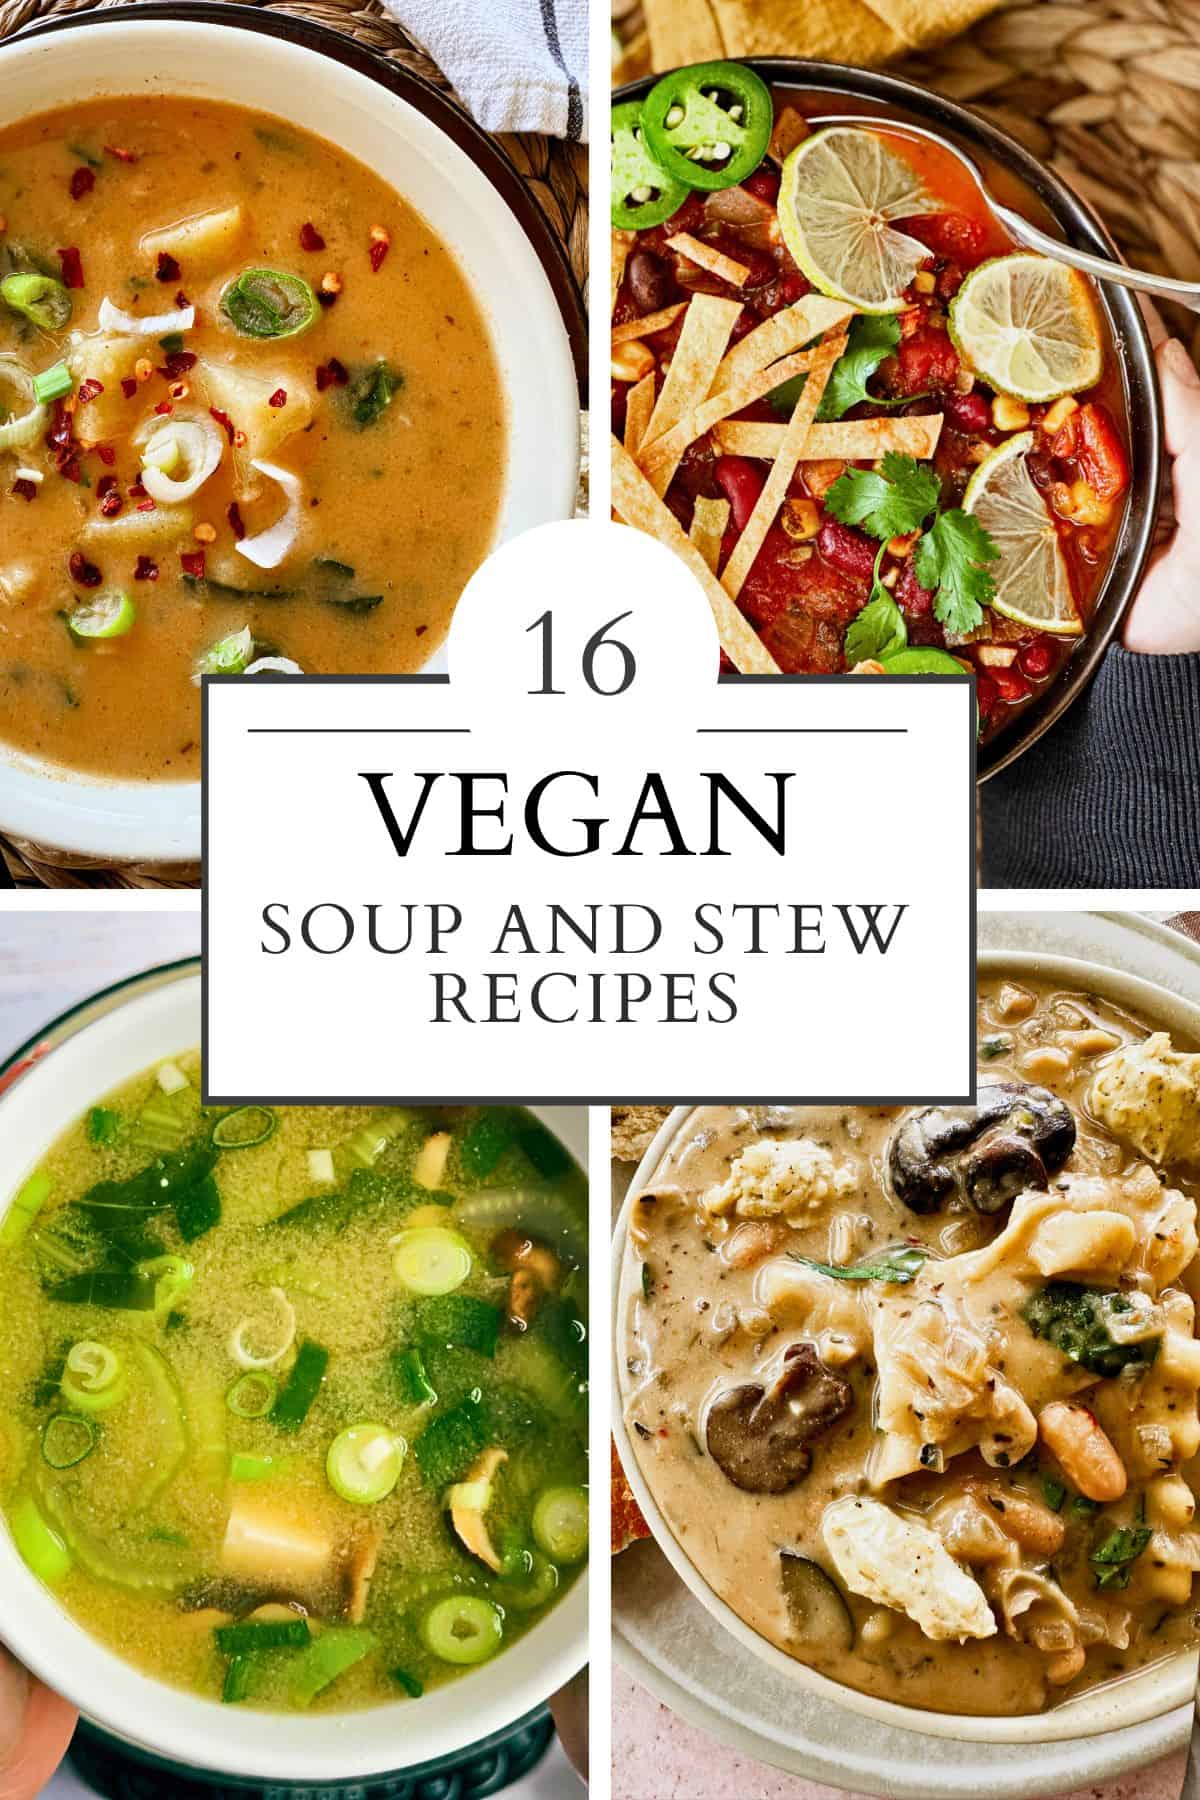 4 pictures of different vegan stews or soups with the article title in the middle